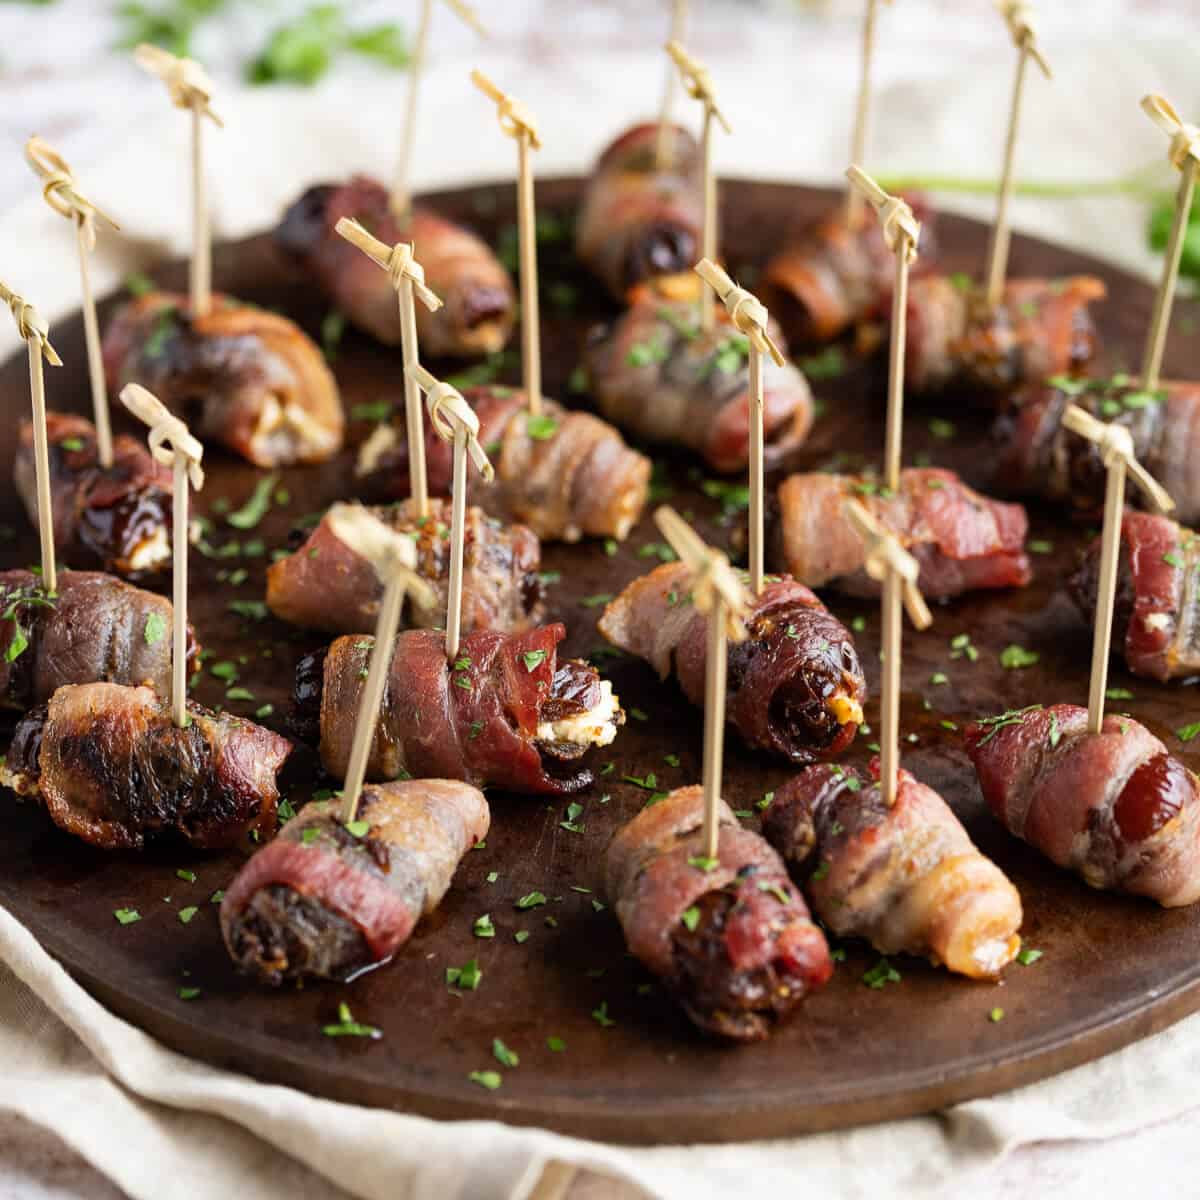 Bacon Wrapped Dates with goat cheese